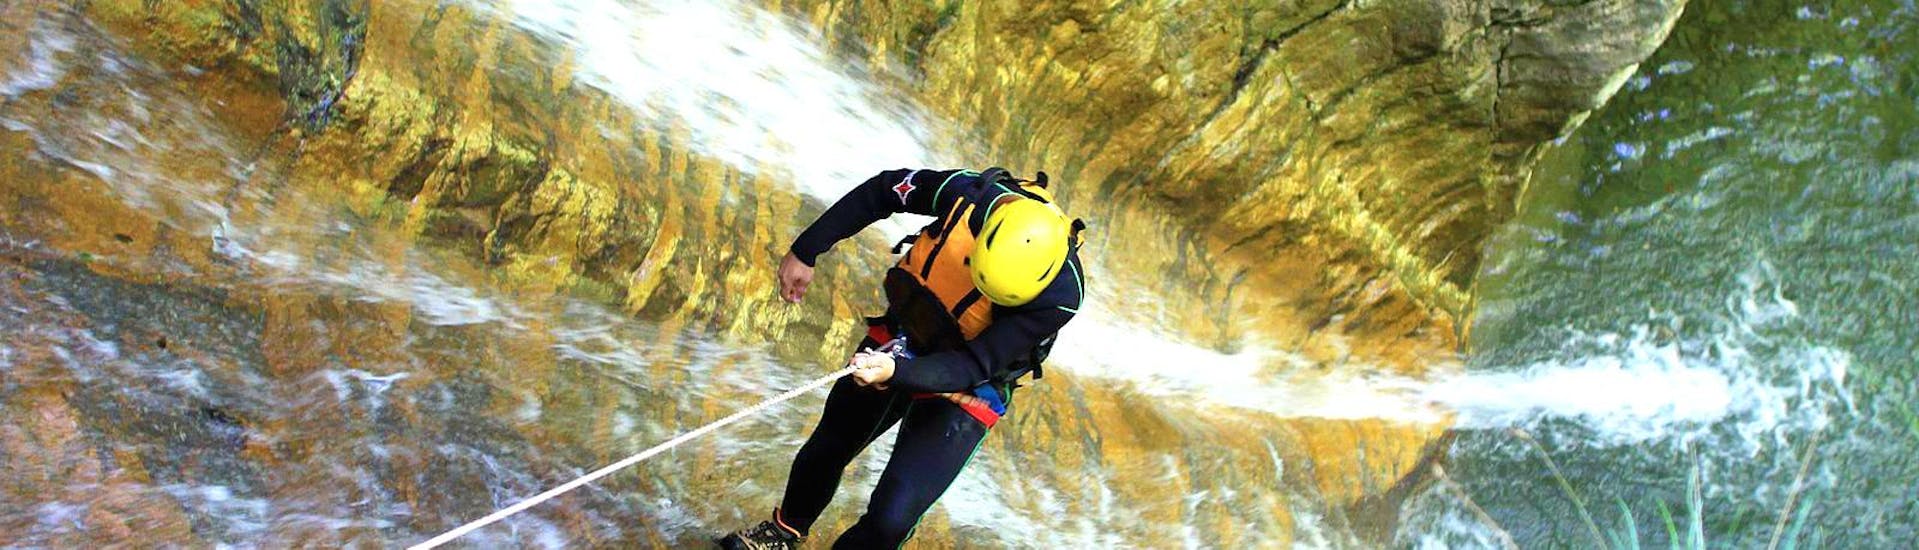 A participant of Extreme Canyoning at Lake Sylvenstein with Montevia is abseiling down a waterfall in the canyon.